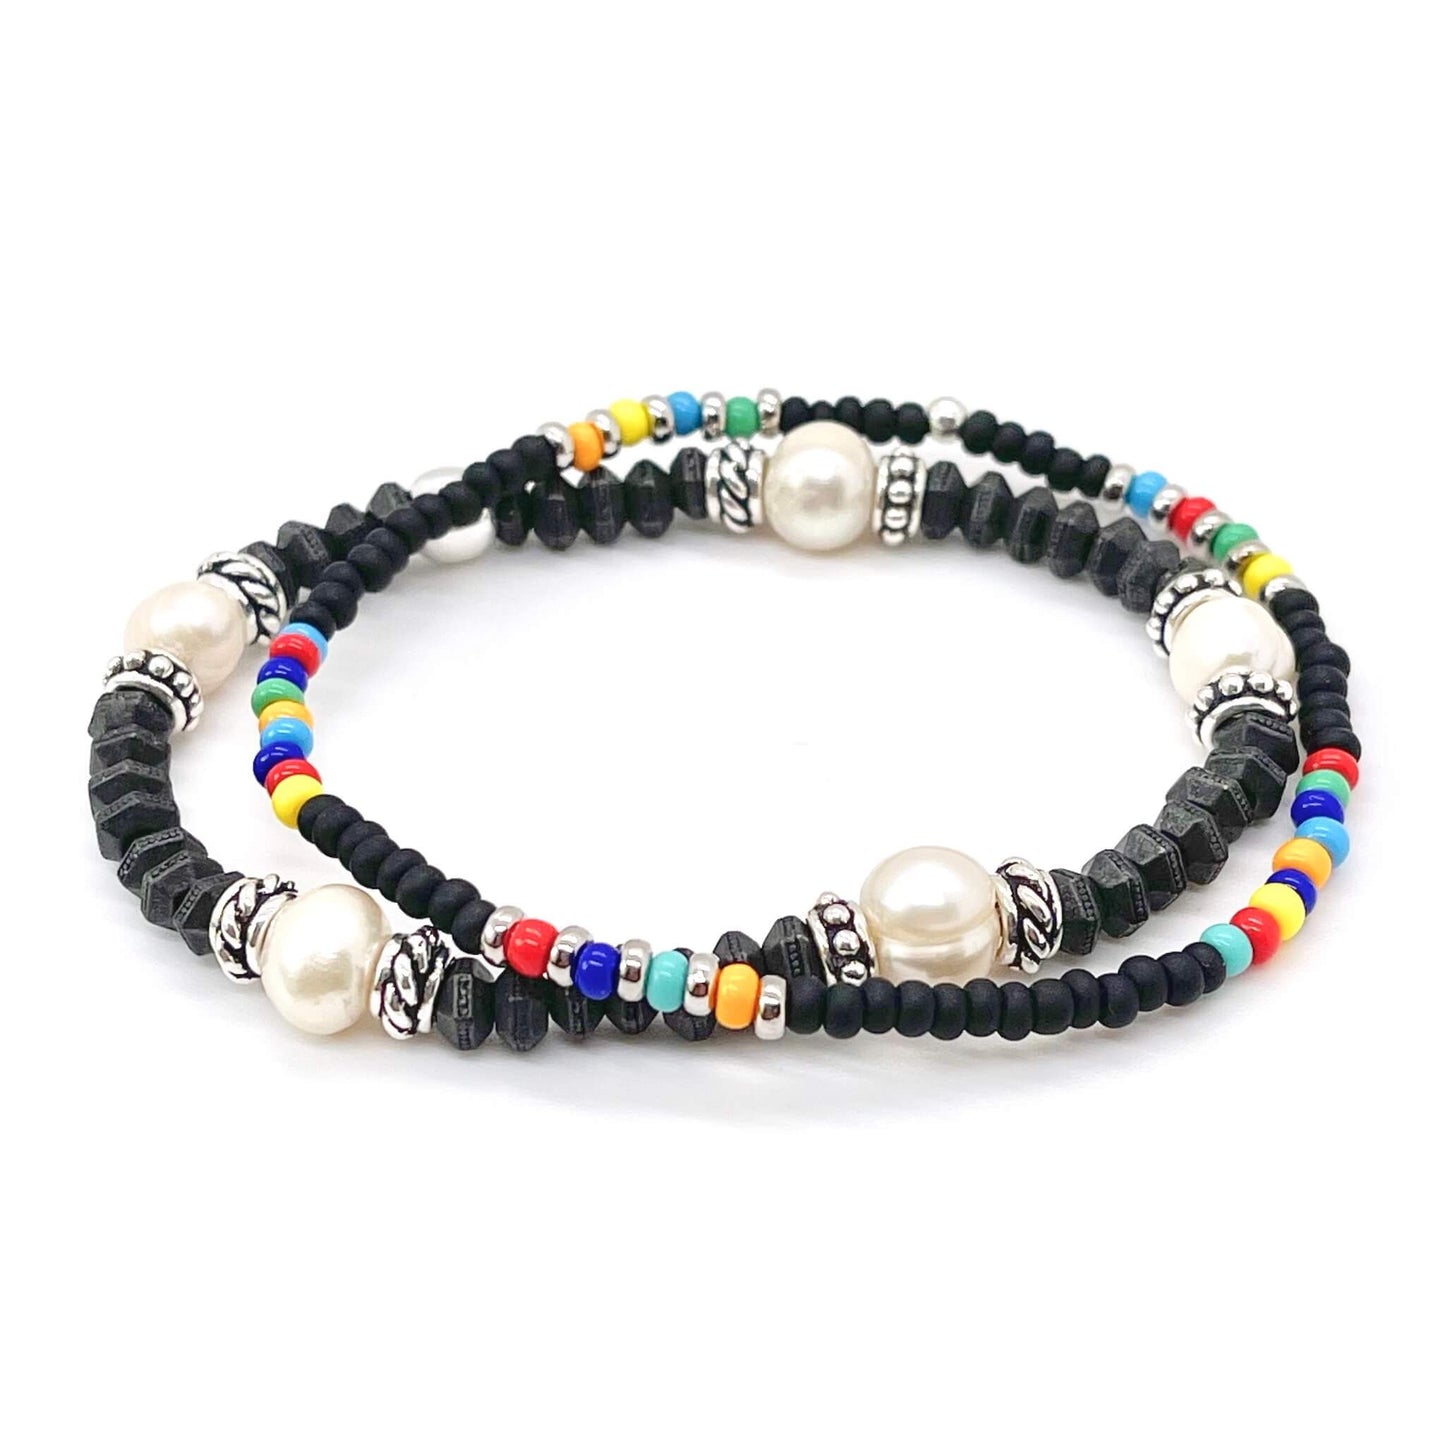 Pearls for men. Trendy pearls. Modern, edgy black and pearl bracelets for men.